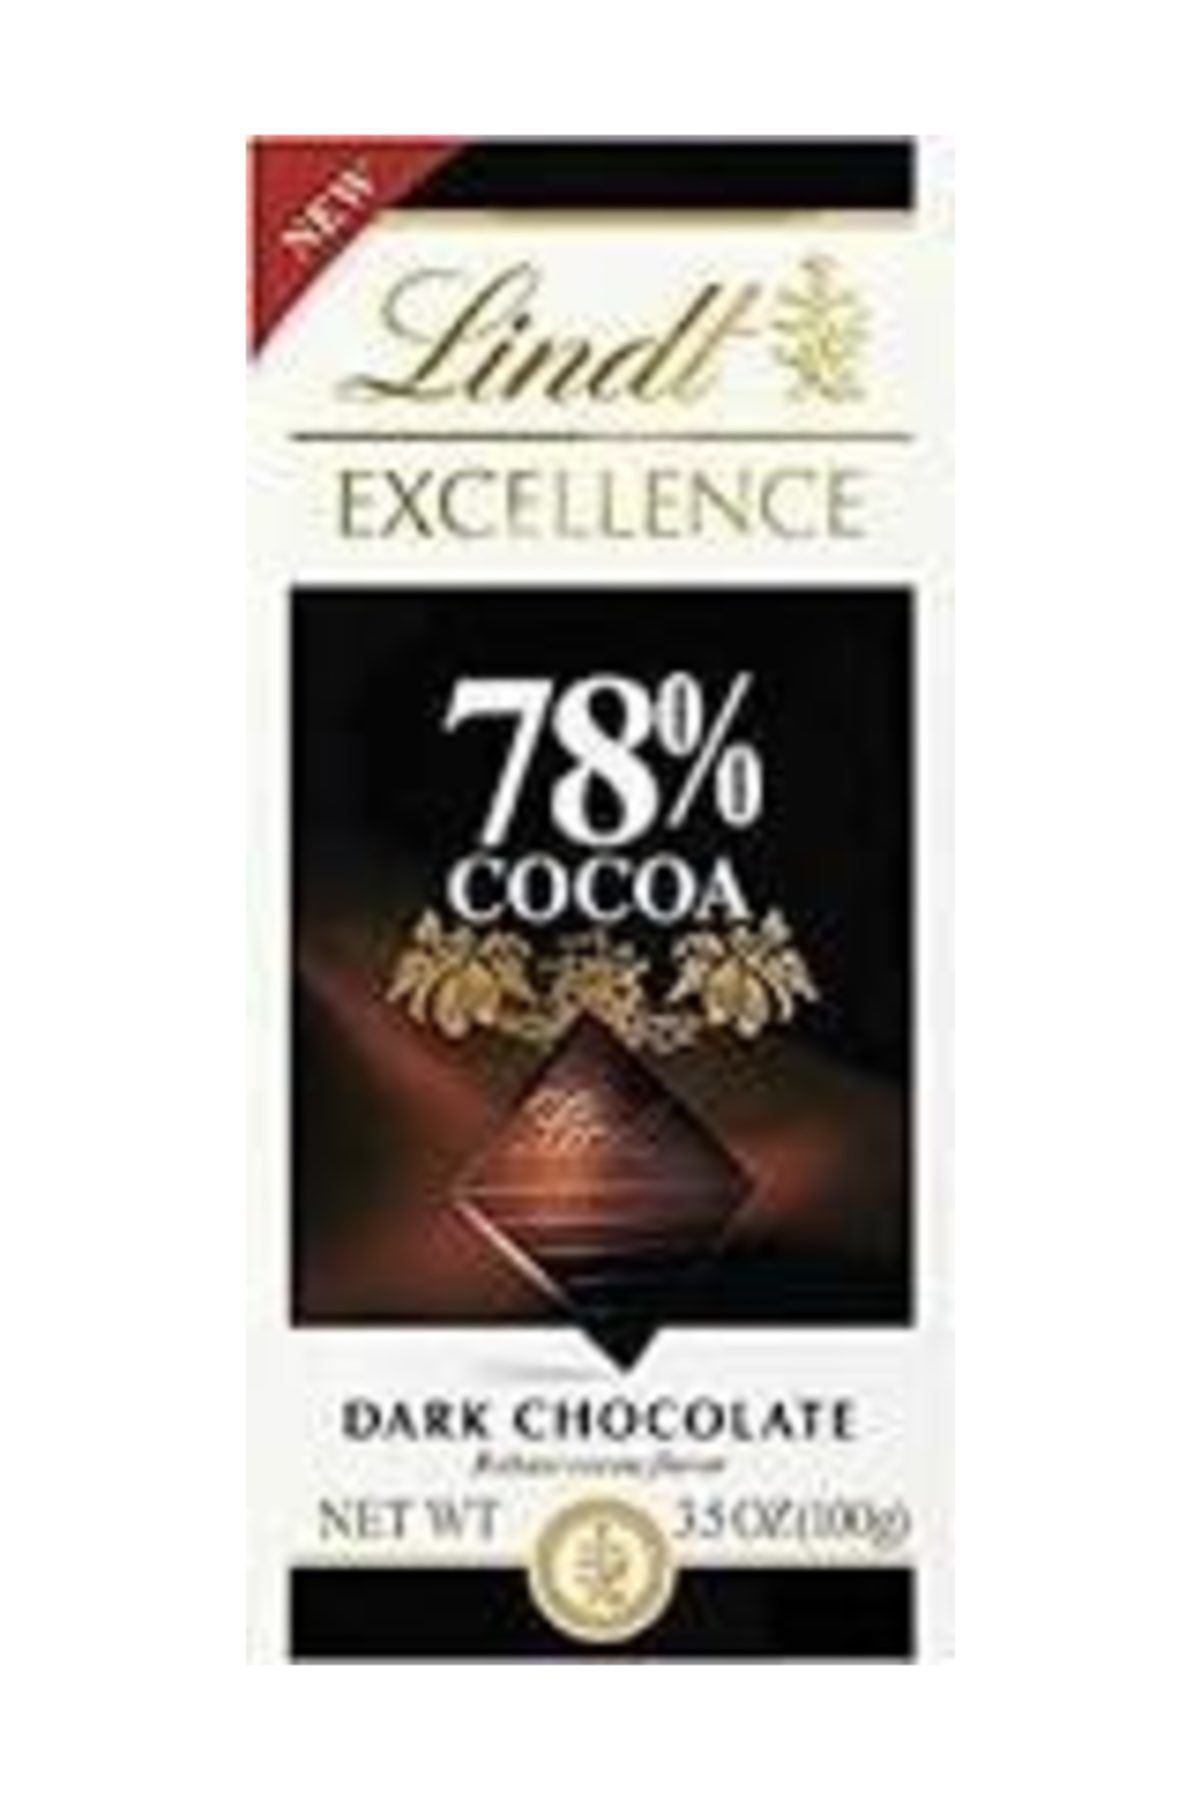 Lindt % 78 Cacao